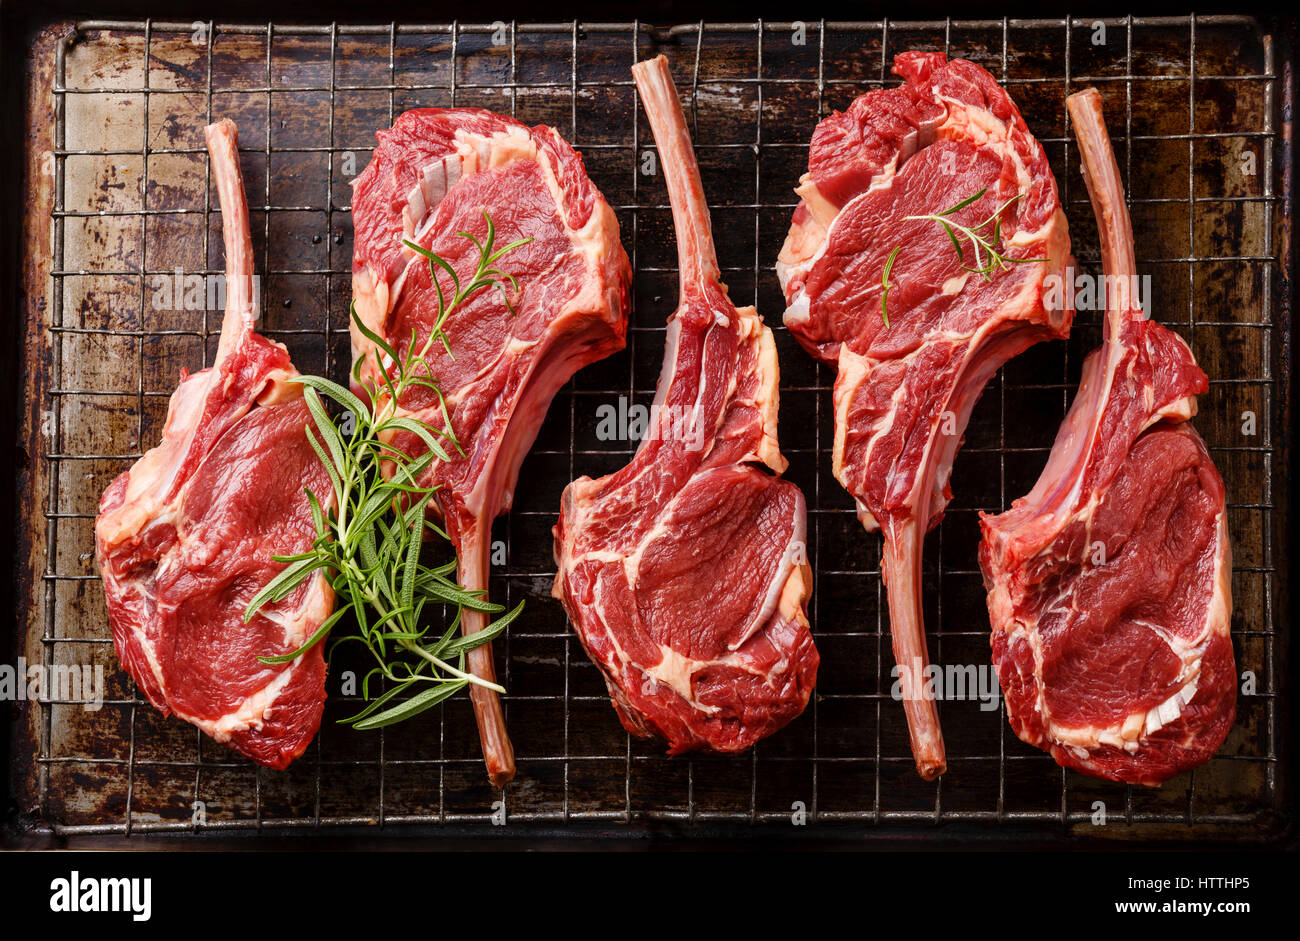 Raw fresh meat Veal ribs on metal grid baking sheet tray Stock Photo